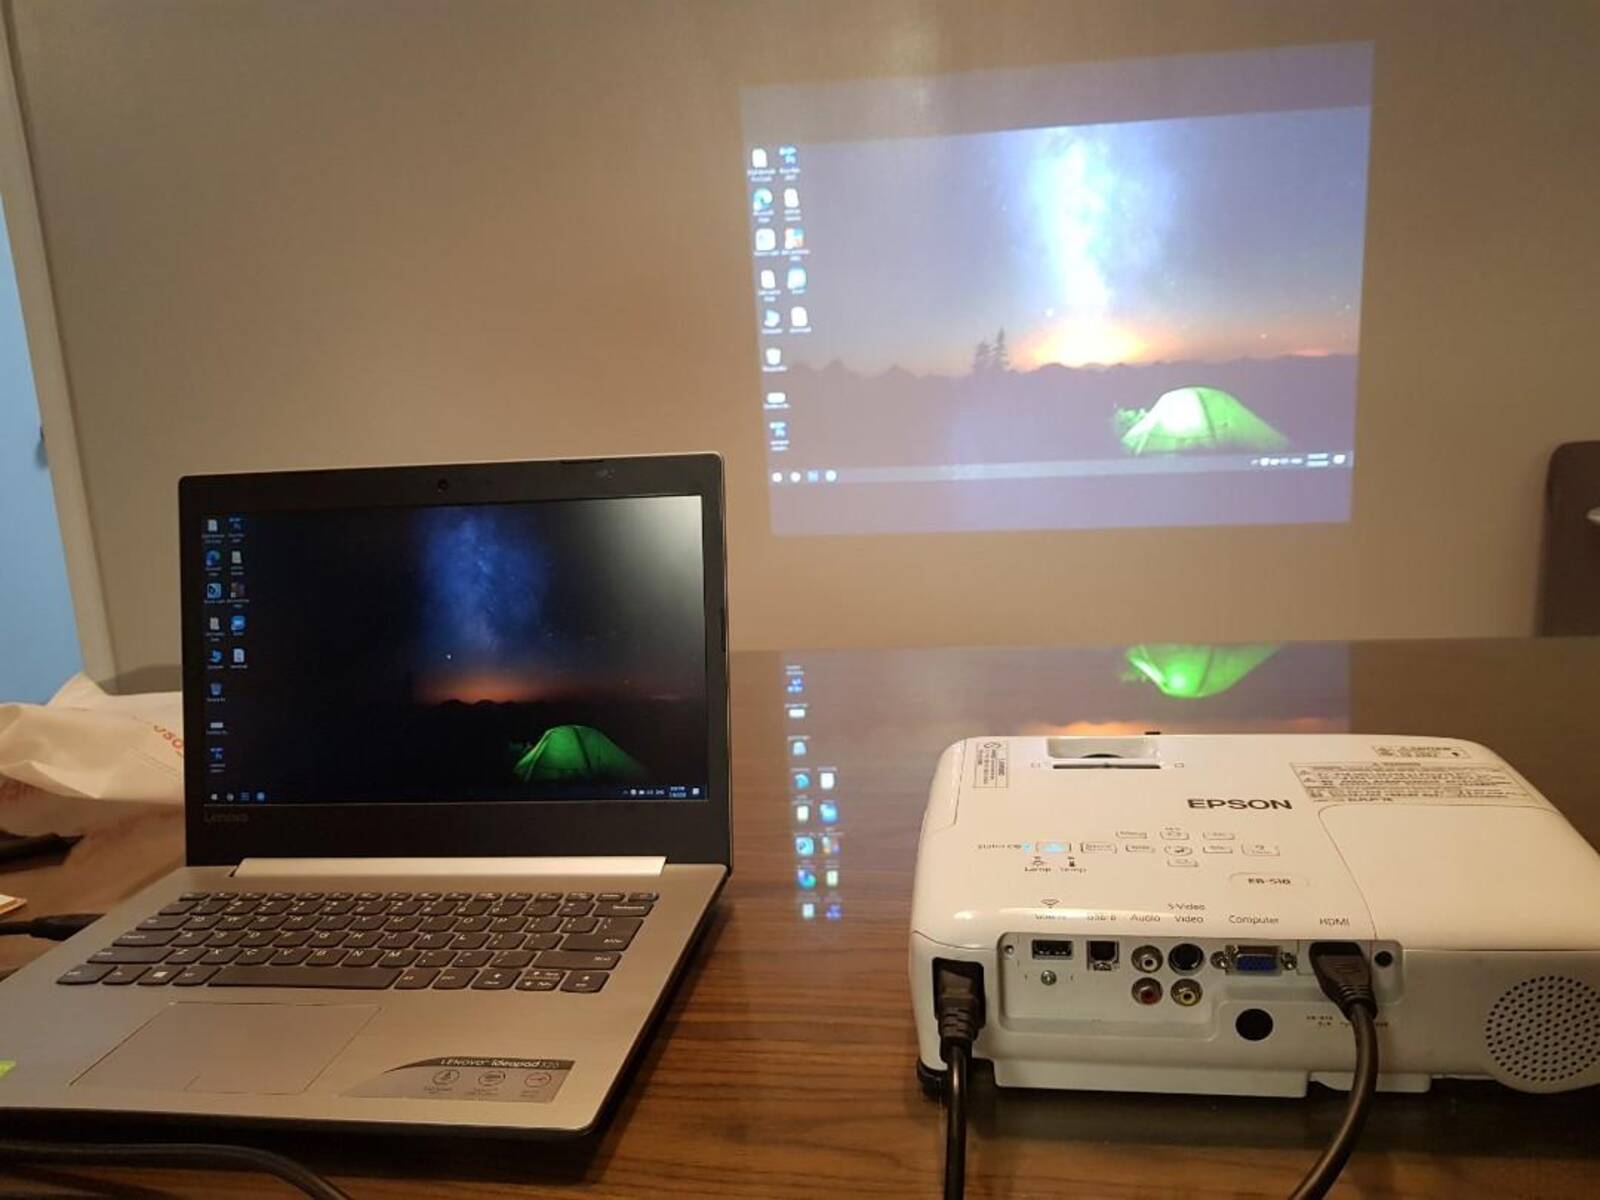 How To Connect Epson Projector To Laptop Using USB Cable